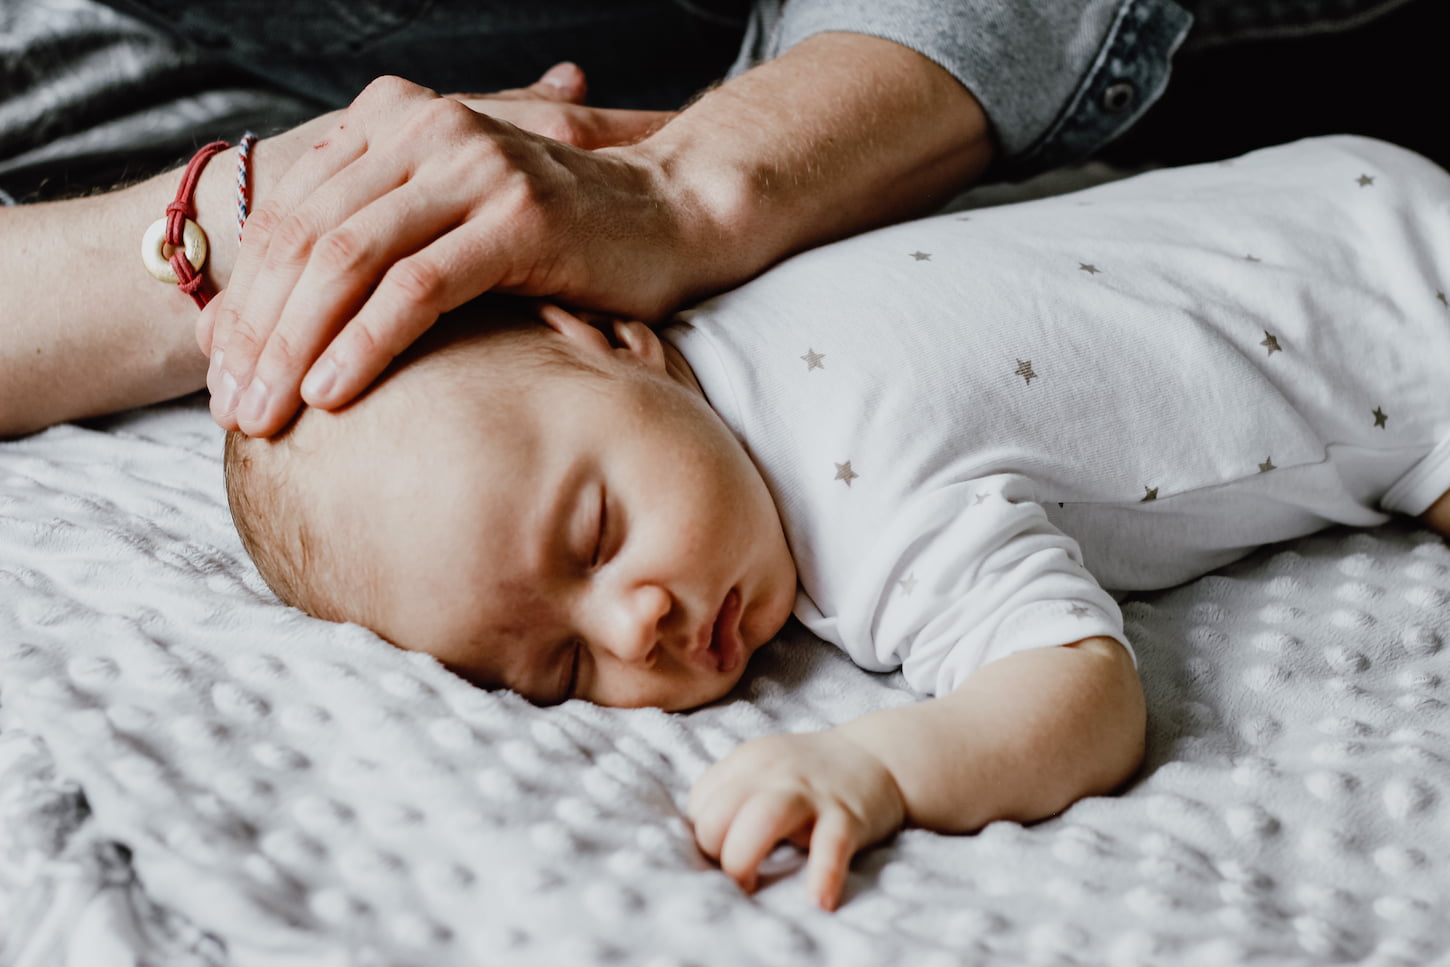 An image of a sleeping baby under the care of his father.